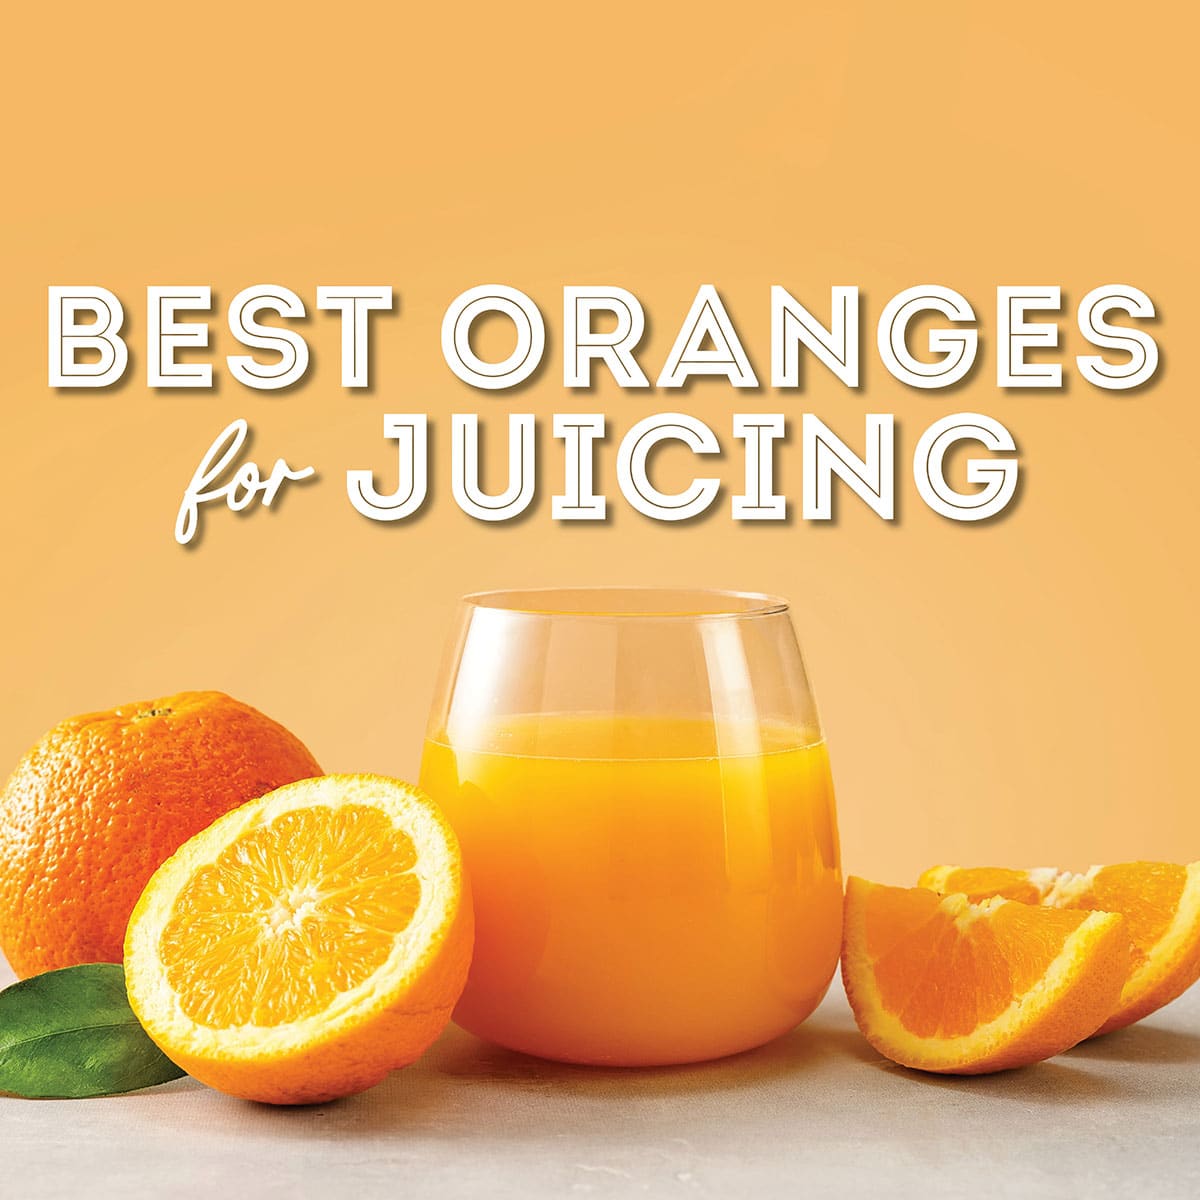 Collage that says "best oranges for juicing".